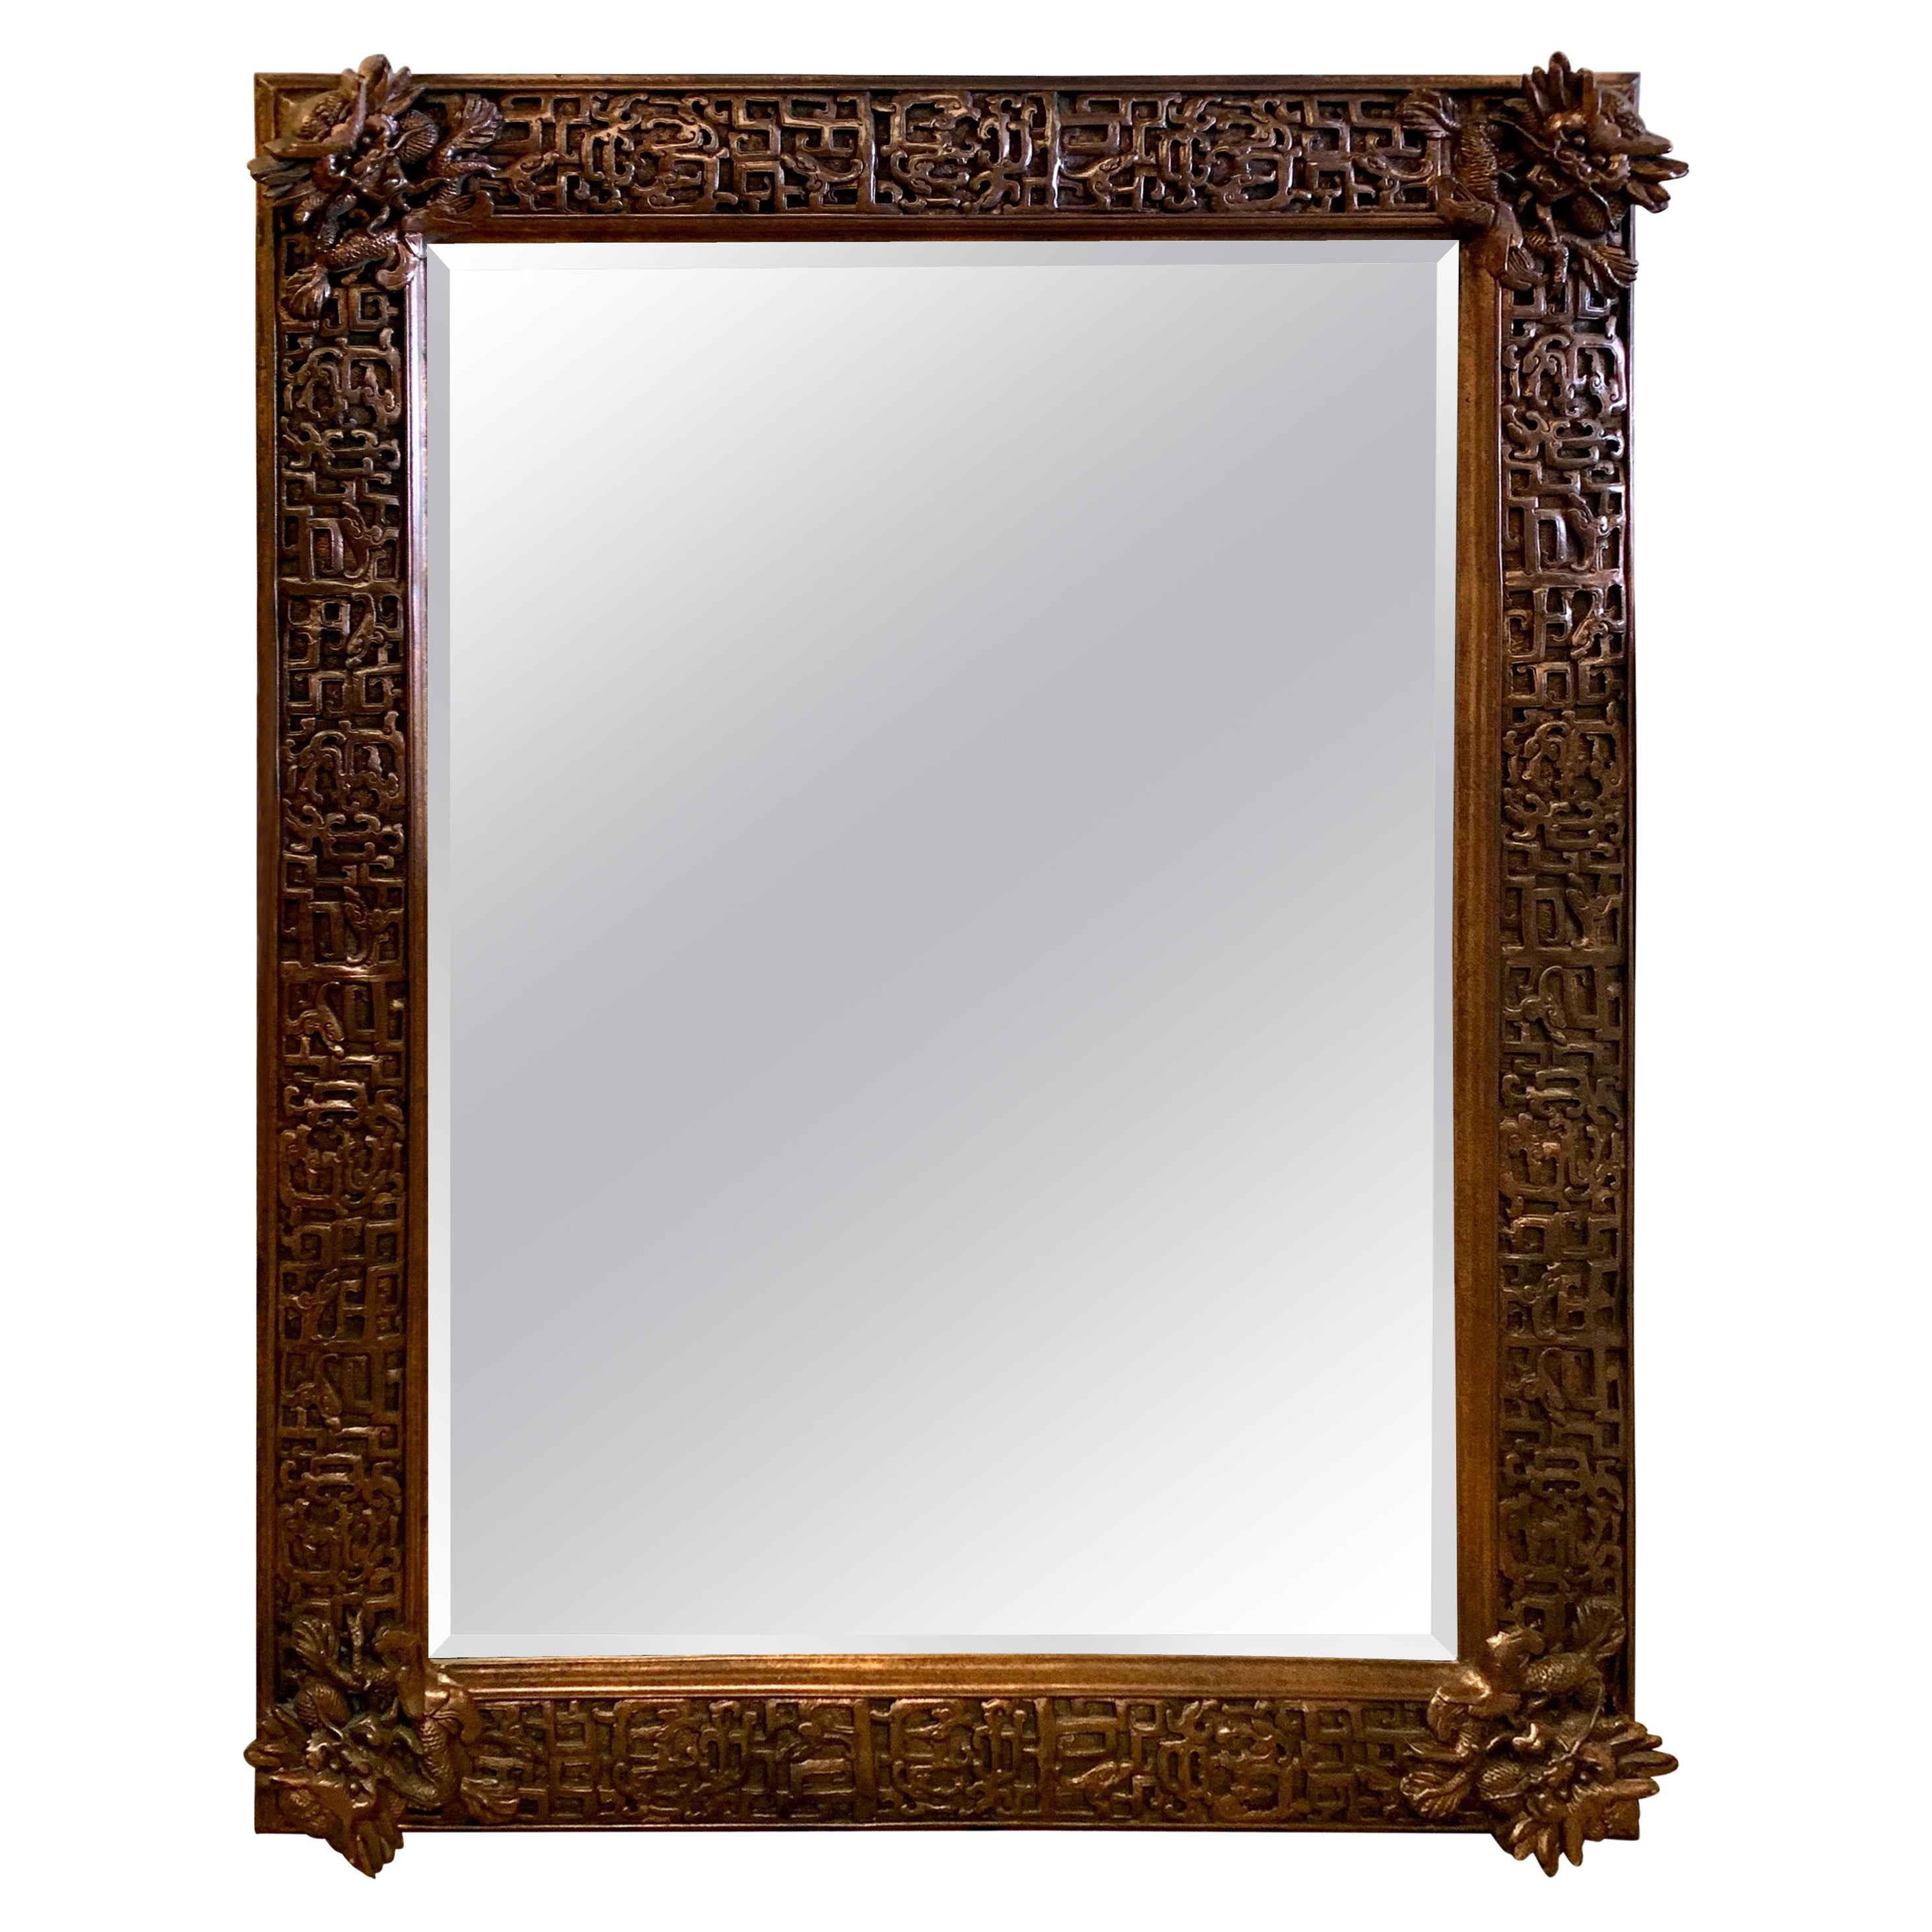 Large Beveled Mirror With Custom Brown, Mirror With Leather Frame